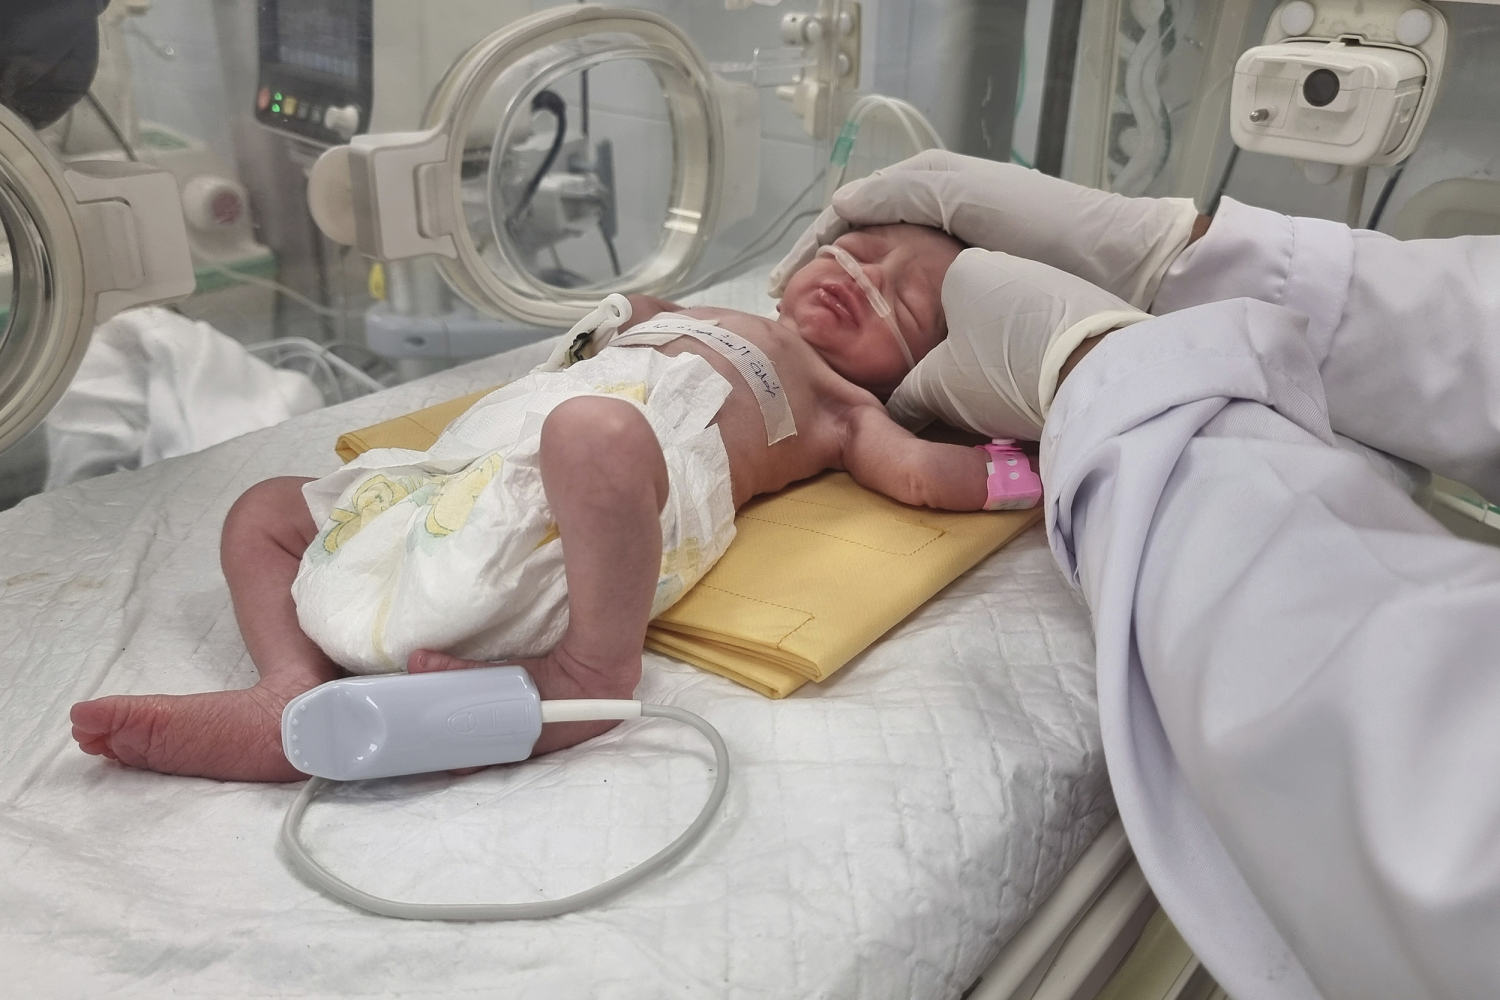 Orphaned by an airstrike and saved from her dead mother's womb, baby Sabreen brings hope to Gaza hospital